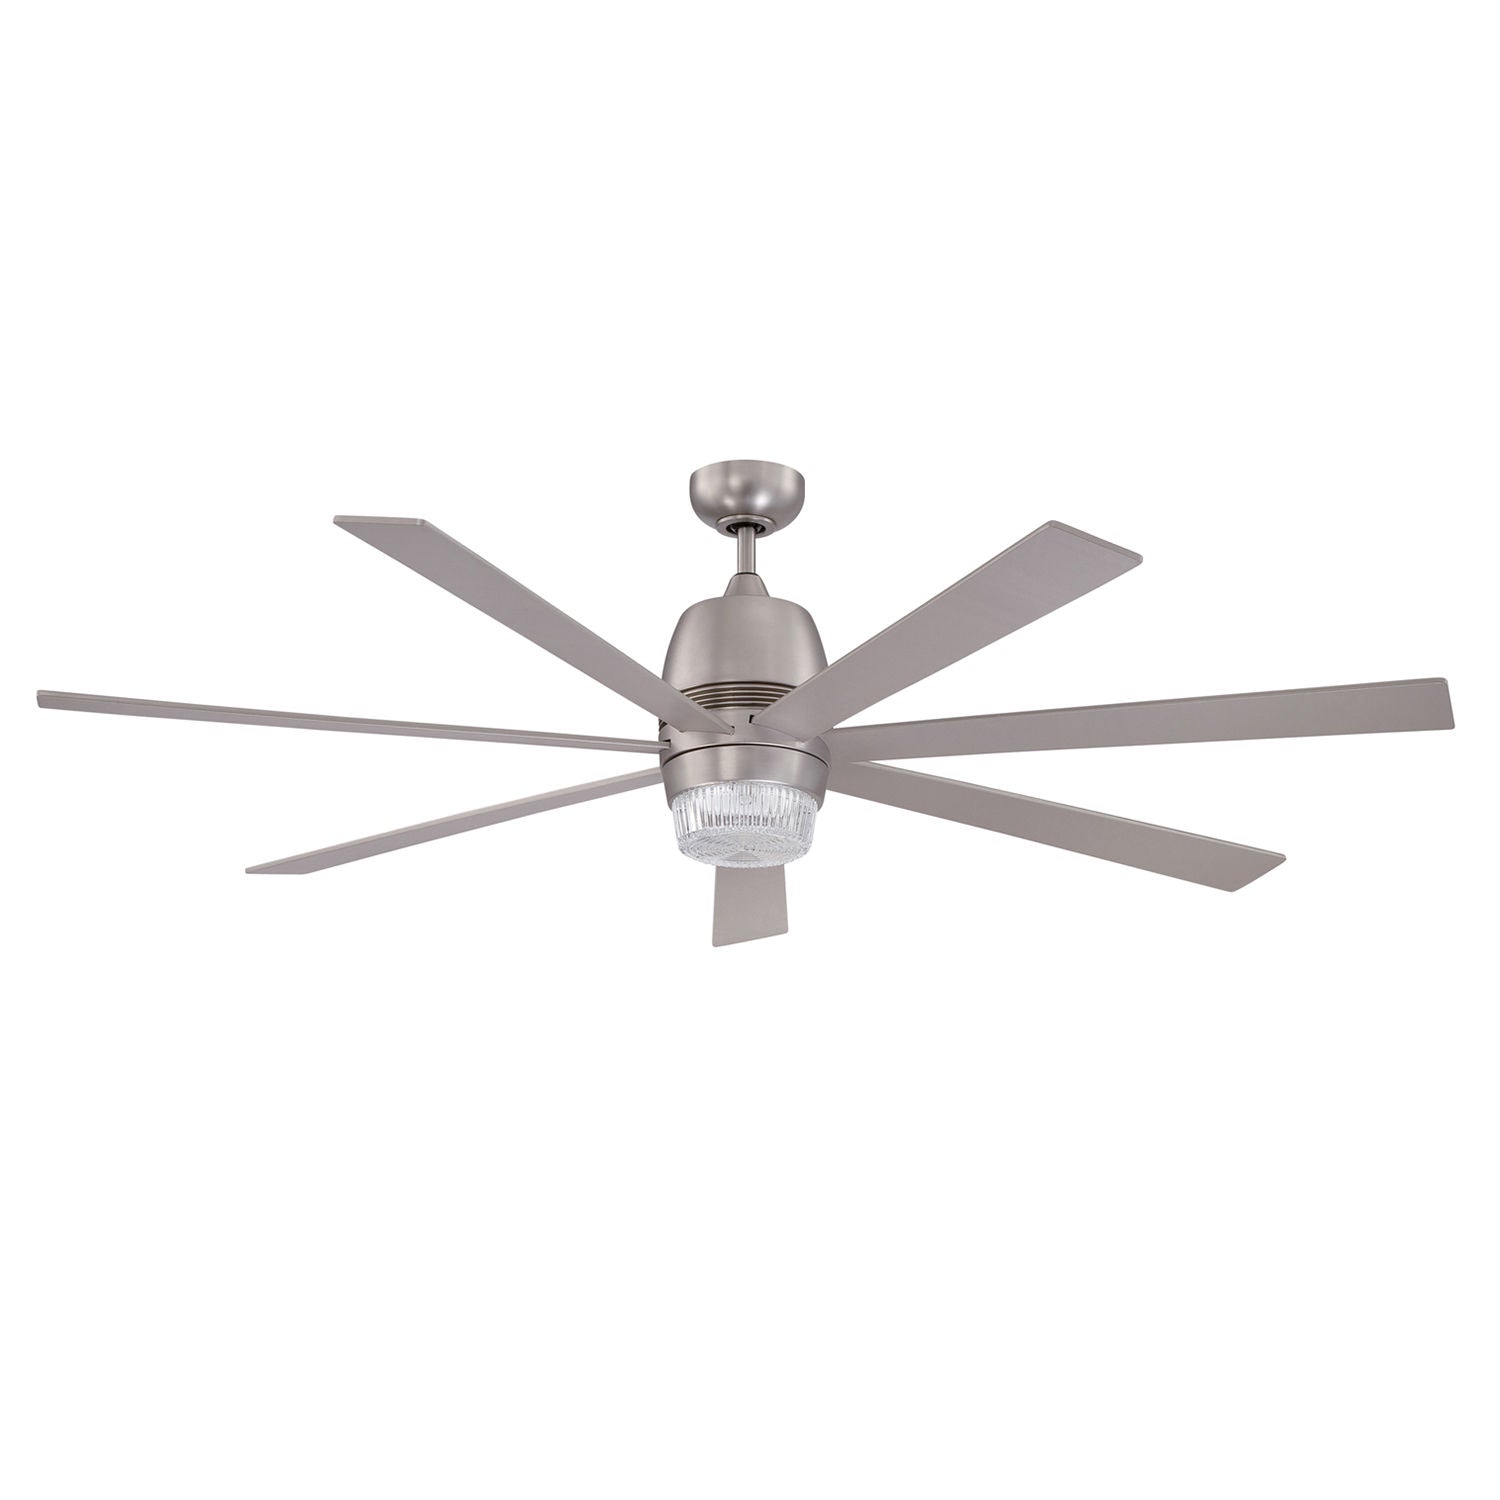 SIXTY-SEVEN Ceiling fan Stainless steel INTEGRATED LED - AC20760-SN | KENDAL